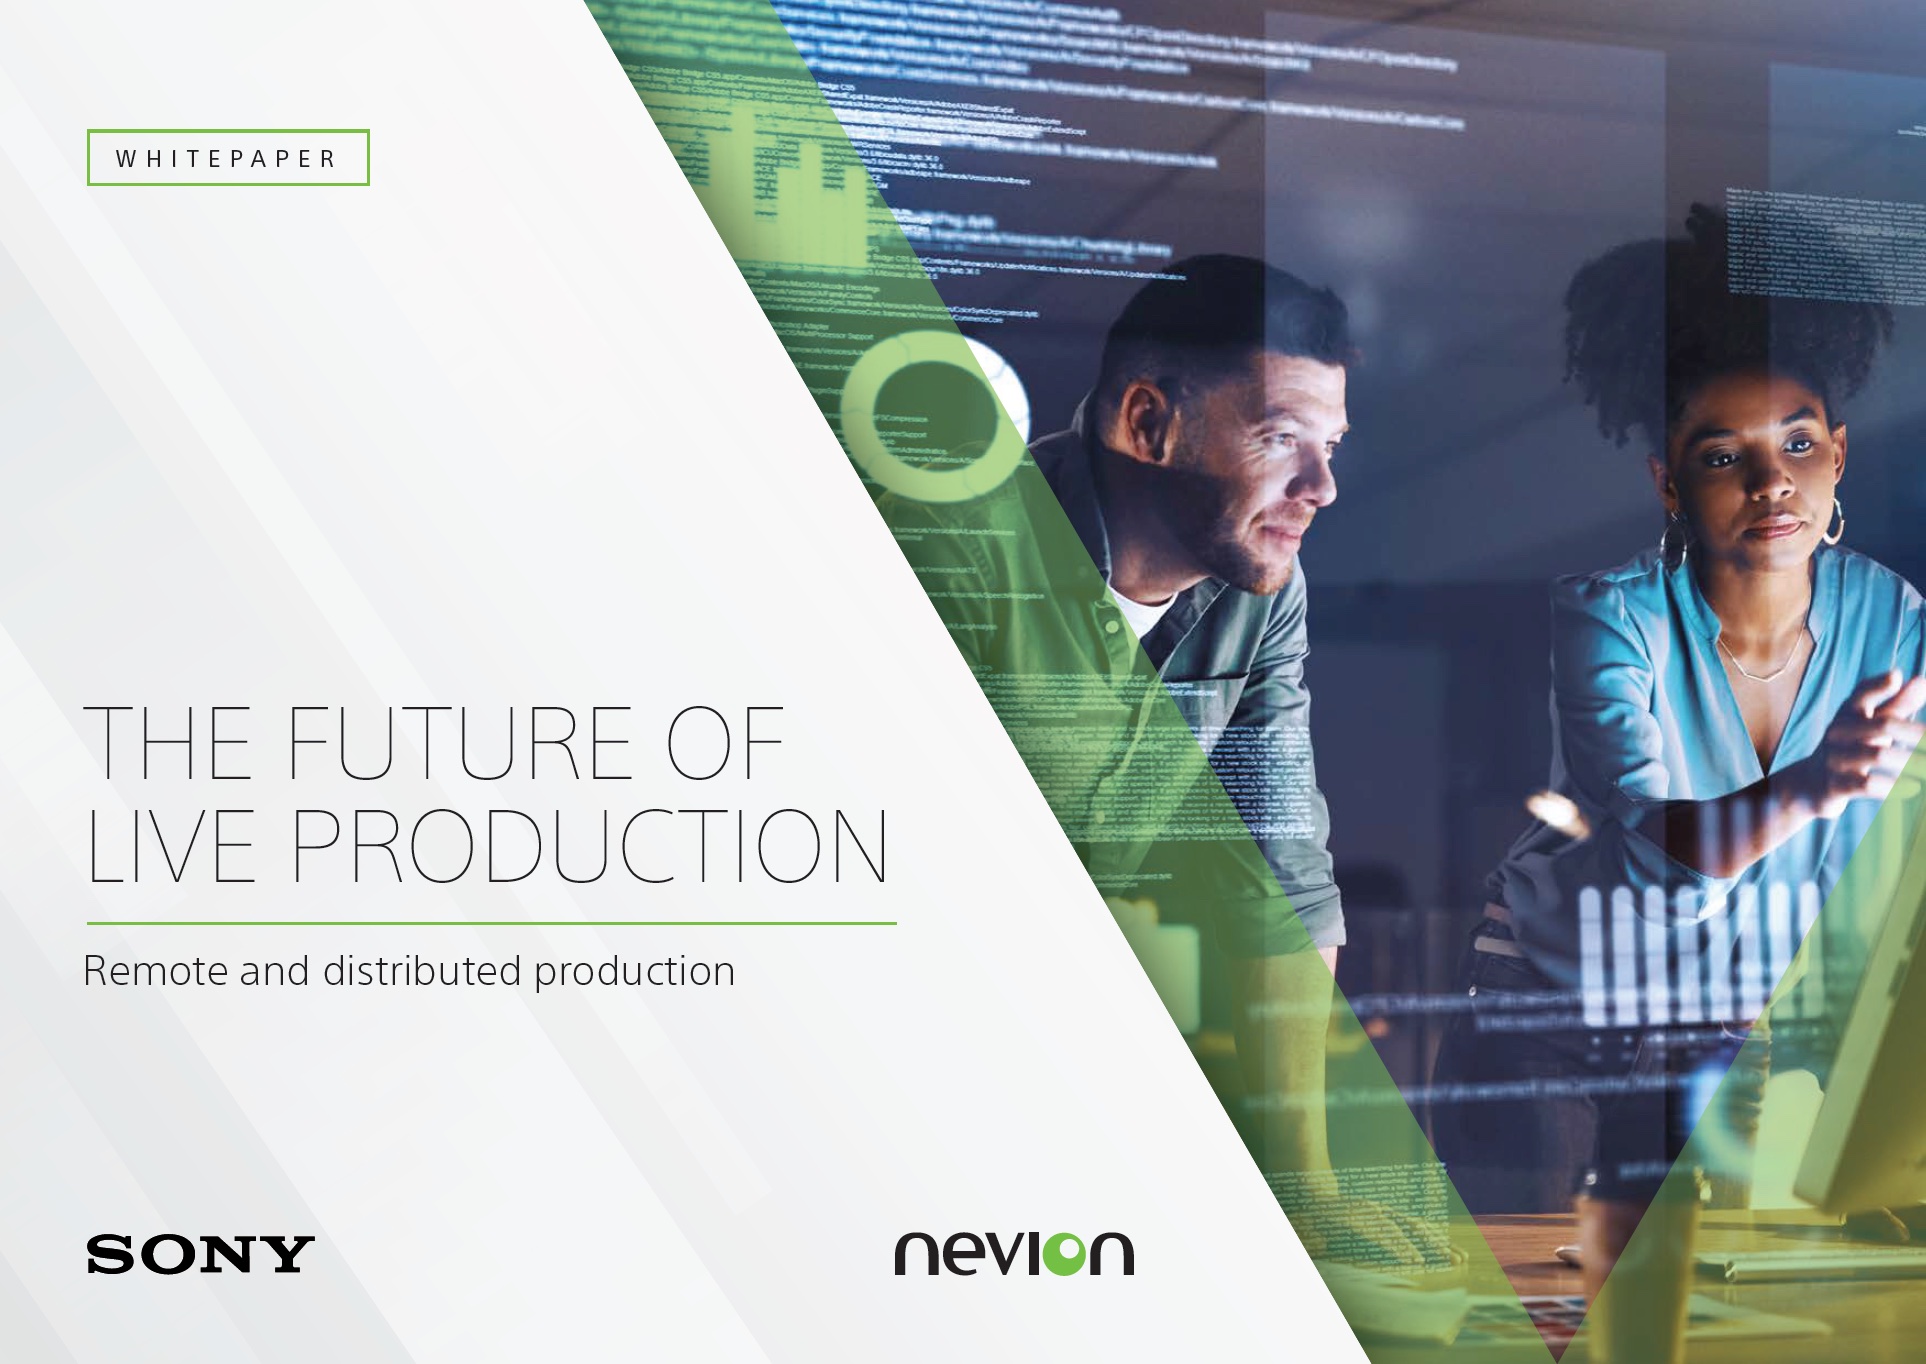 Whitepaper: The future of live production – Remote and distributed production